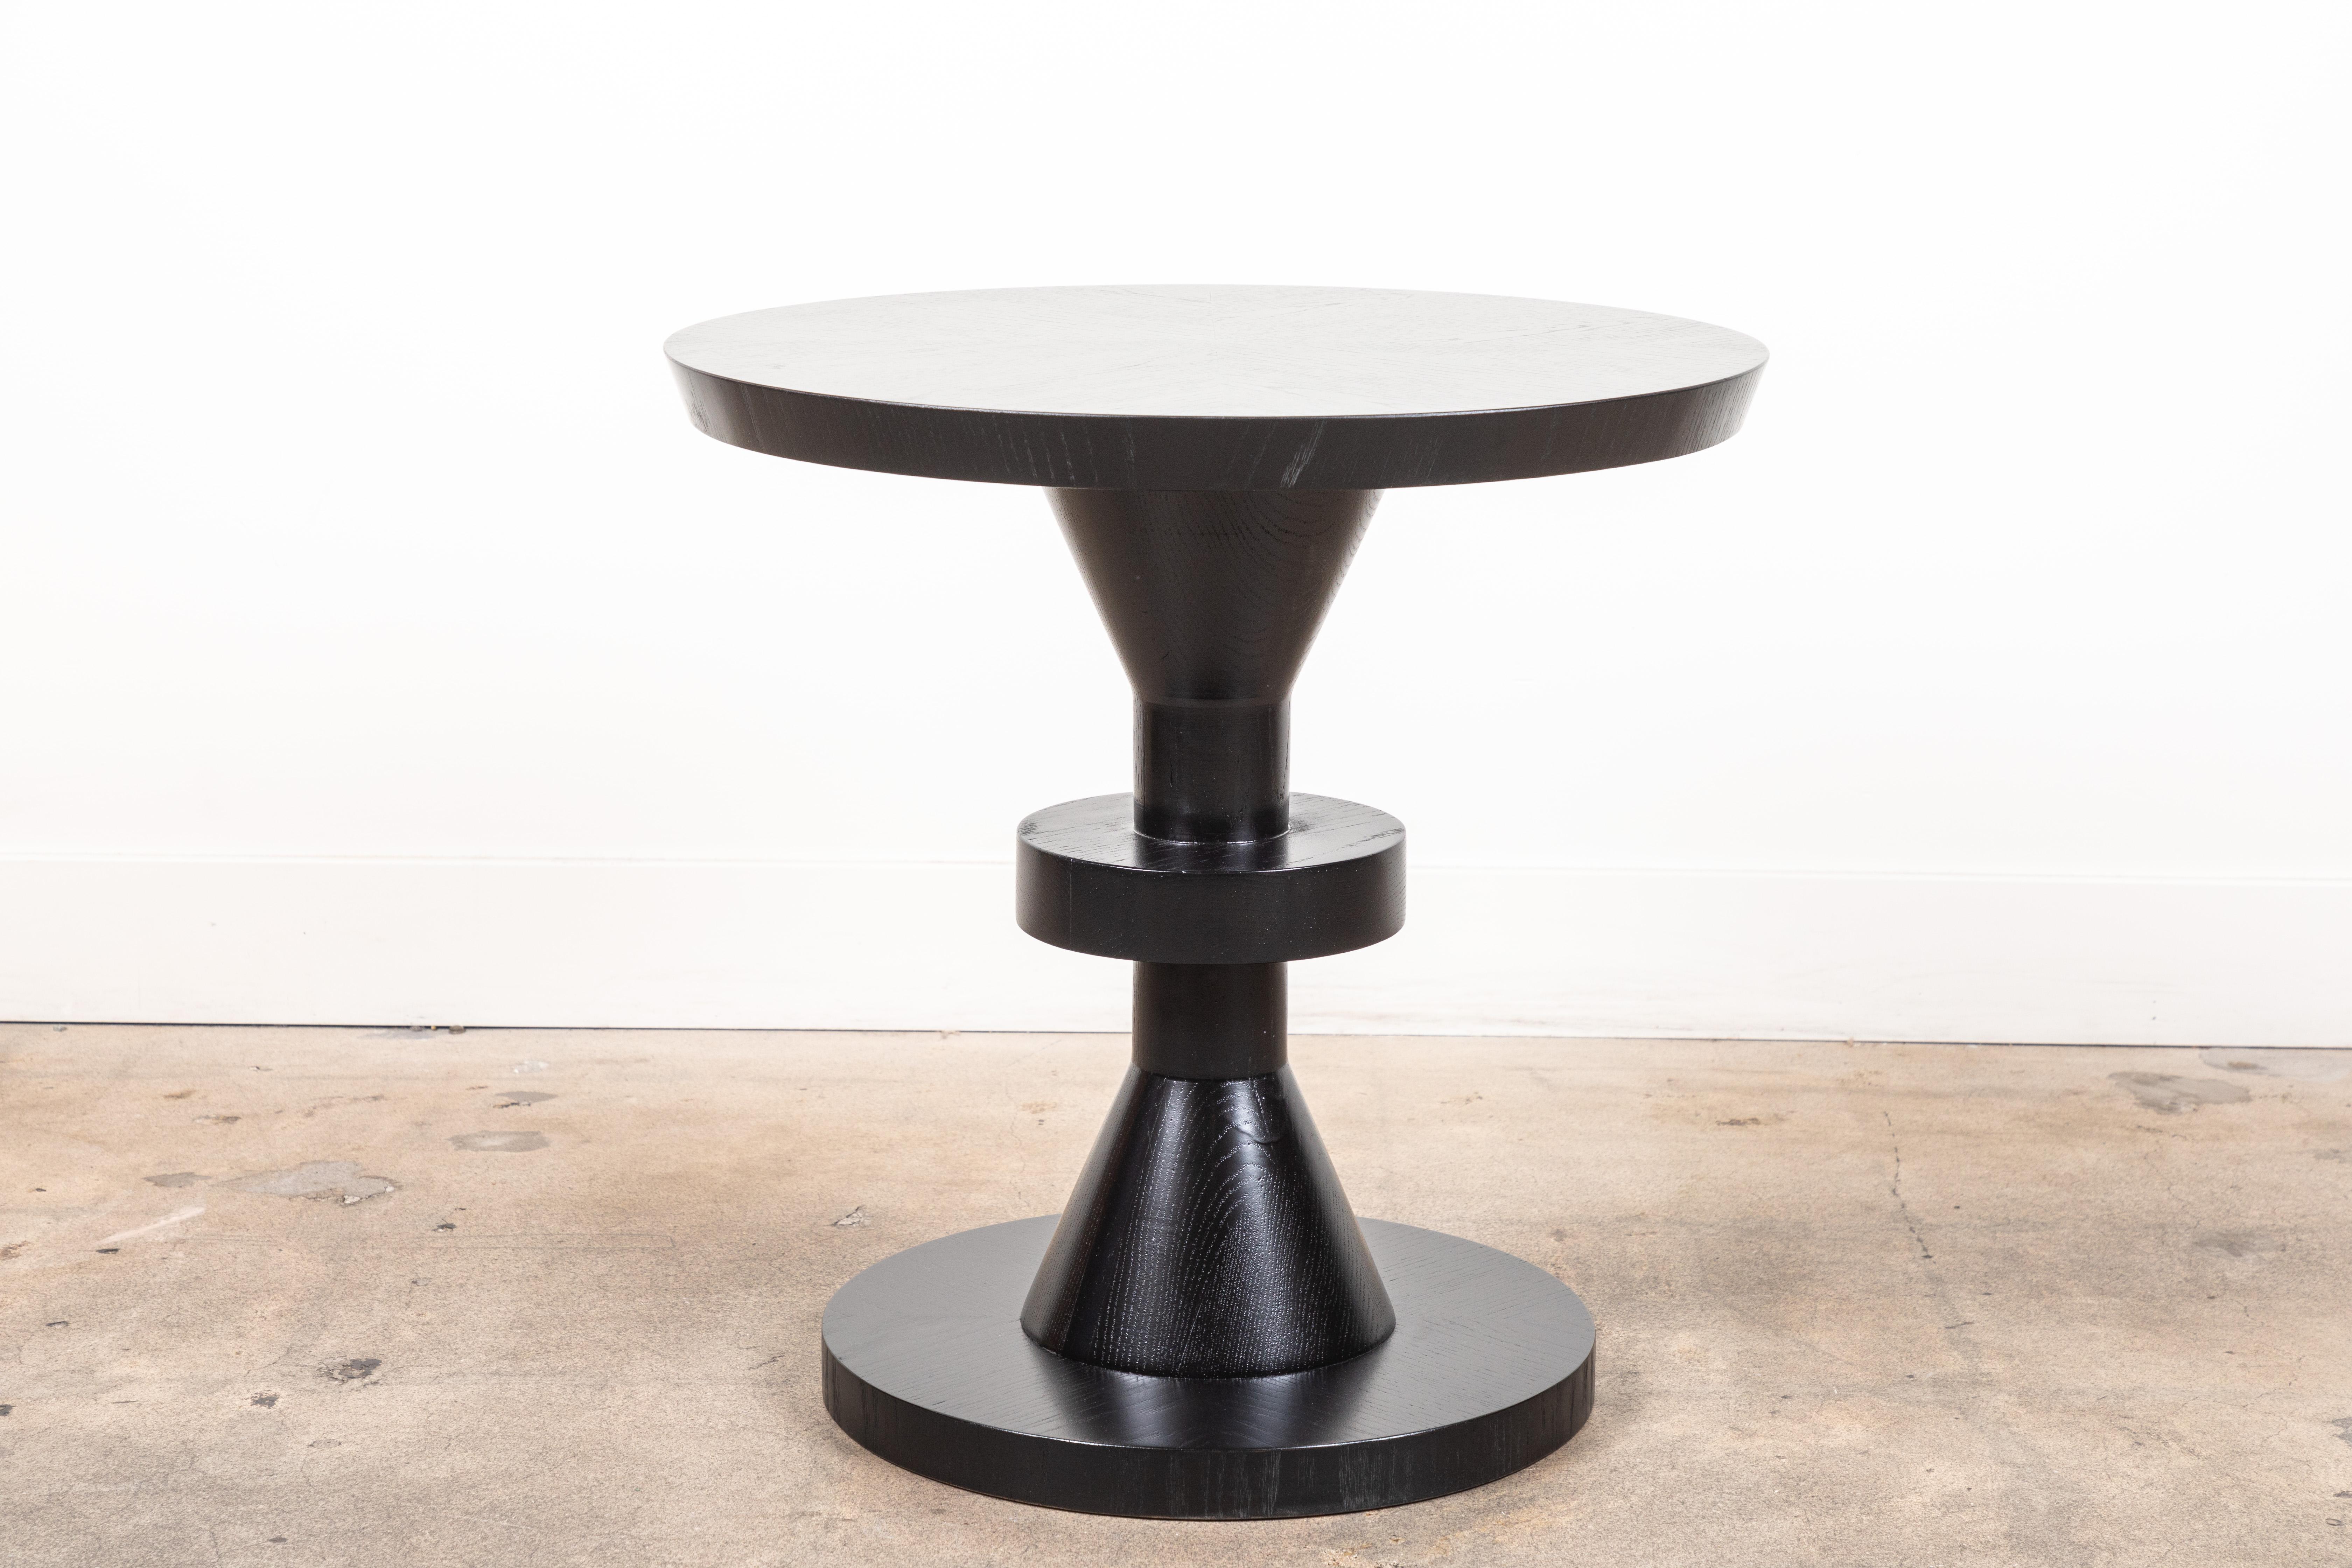 The capitola table features a series of geometric shapes stacked on top of each other with solid wood details. Available in American walnut or white oak. Shown here in ebonized oak.

The Lawson-Fenning collection is designed and handmade in Los